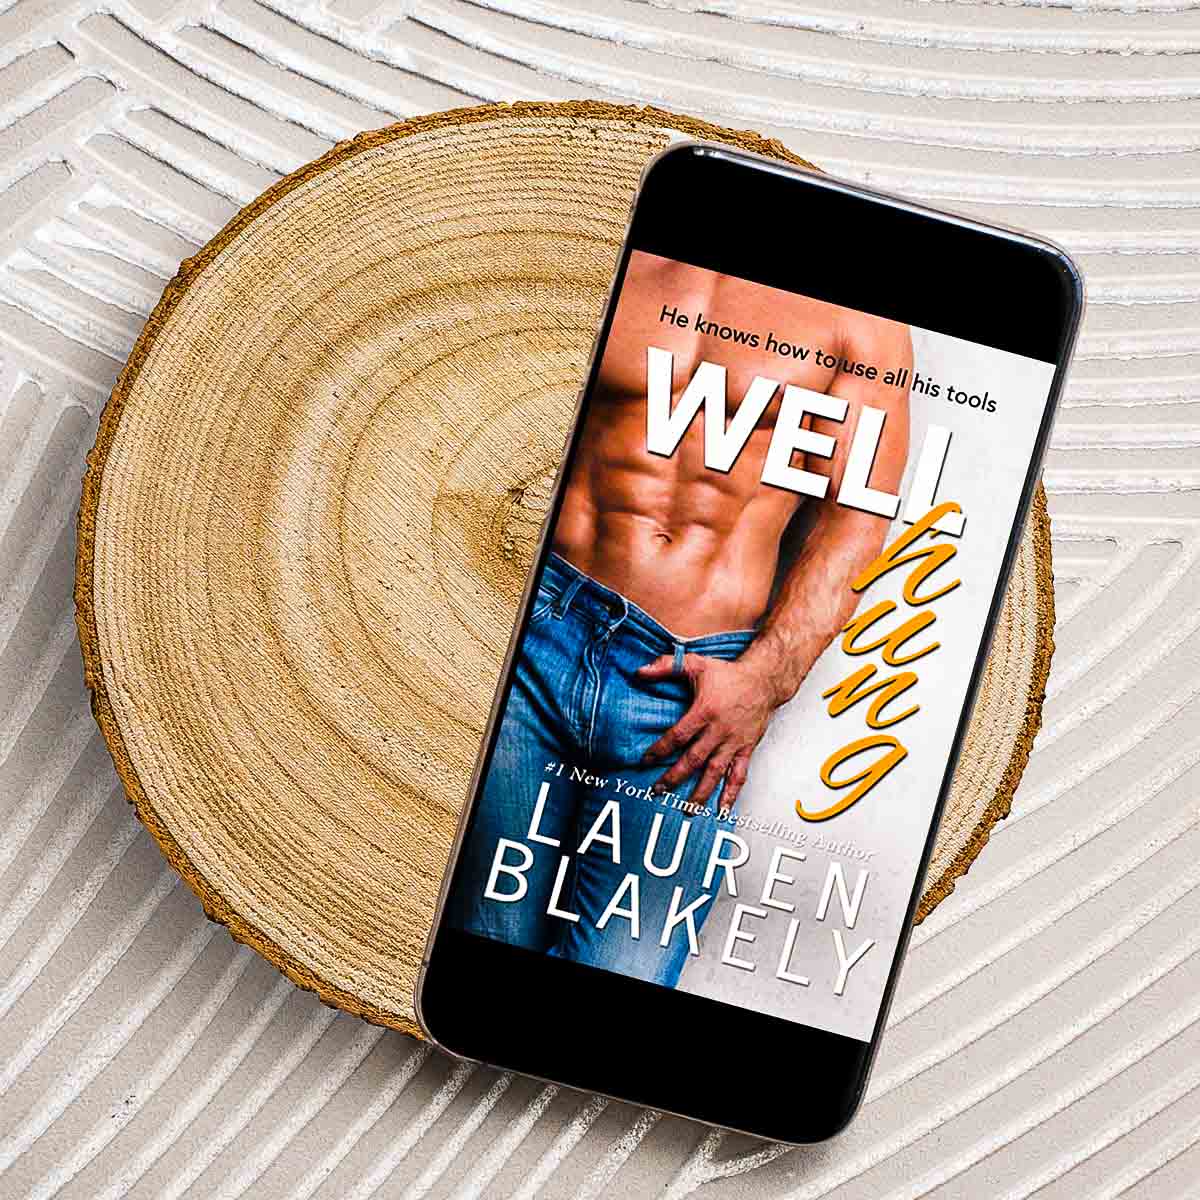 Well Hung by Lauren Blakely is a laugh-out-loud, co-workers-to-lovers, accidental marriage romantic comedy. Read my review and an excerpt from the book!